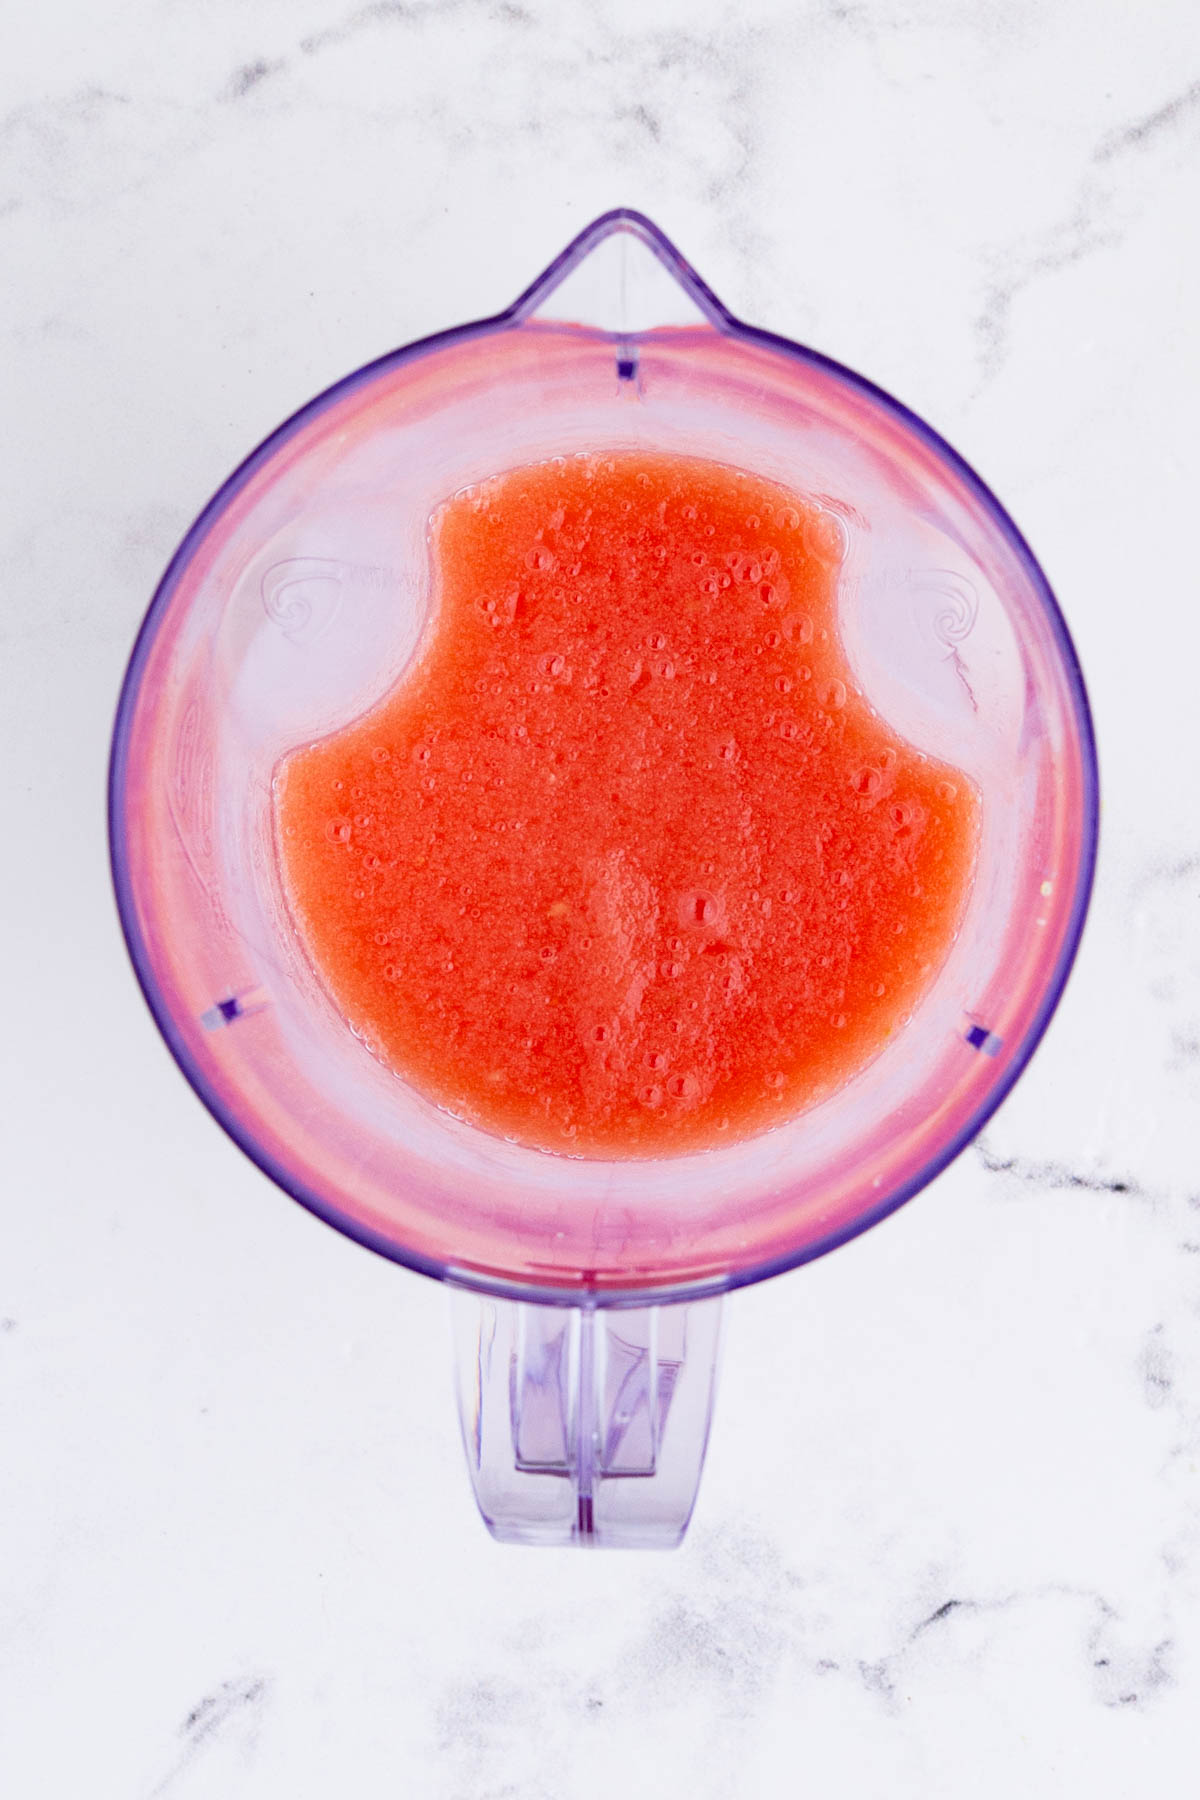 Watermelon margarita is blended smooth.